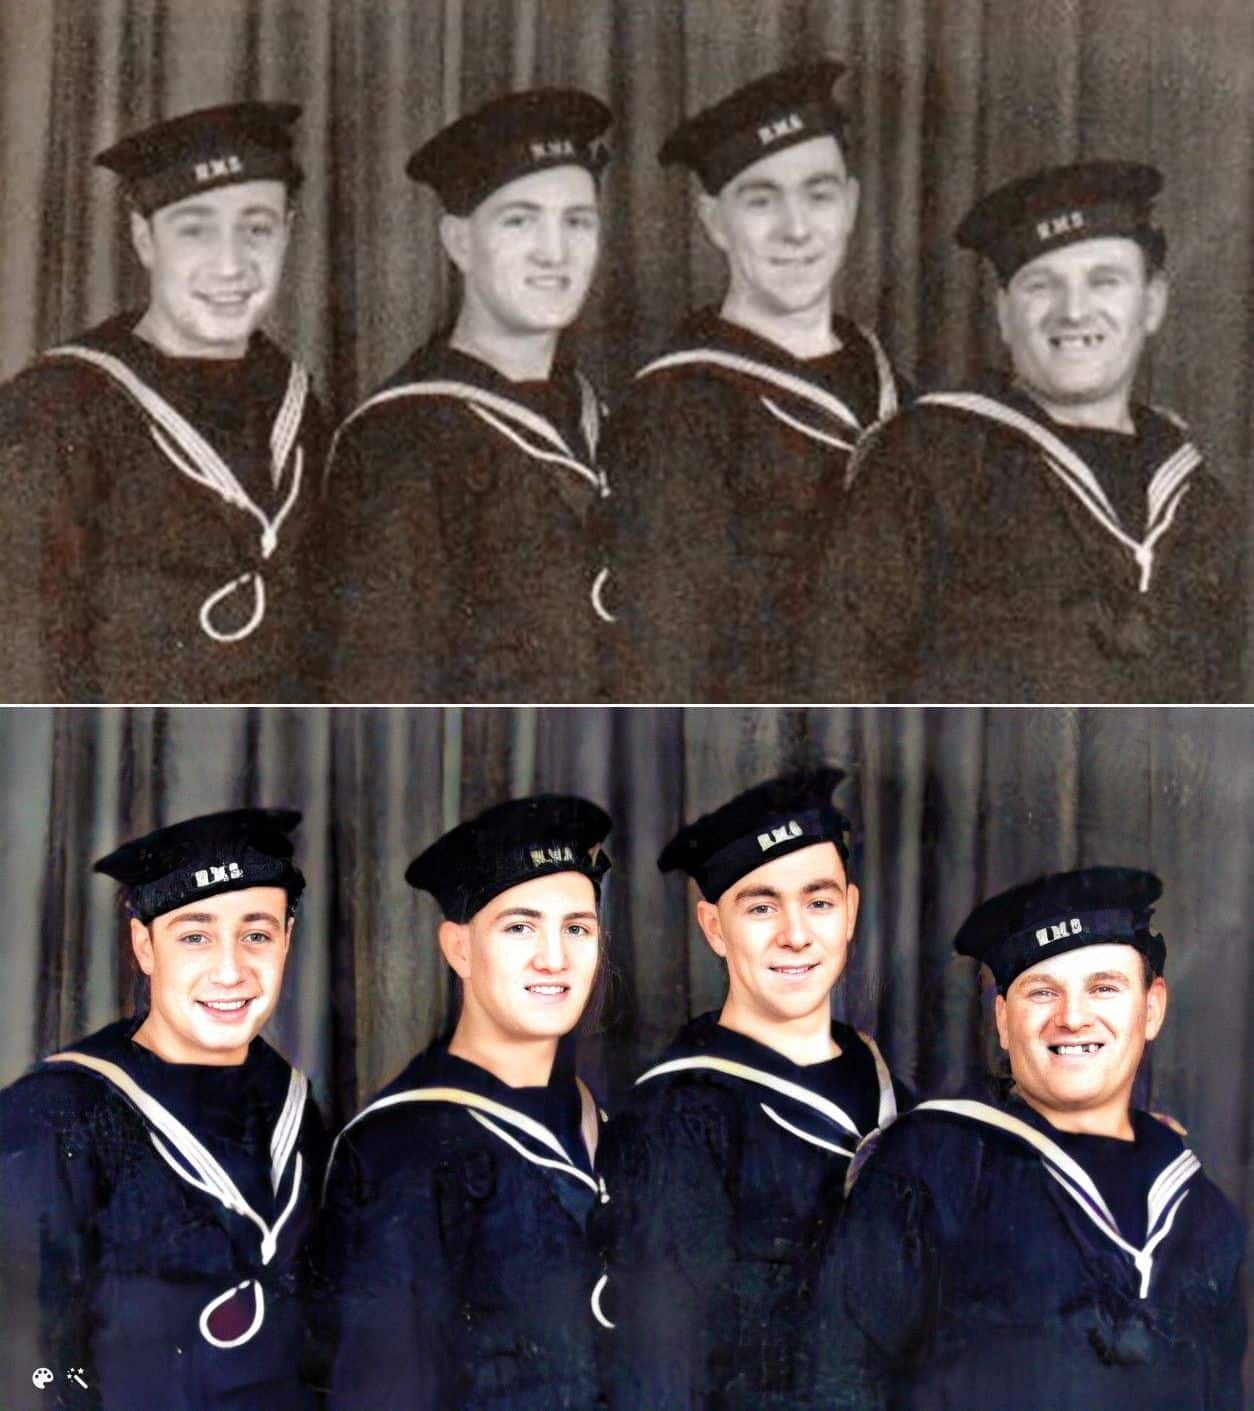 Sailors from the H.M.S. Repulse, enhanced and colorized on MyHeritage [Credit Ken McGuire]